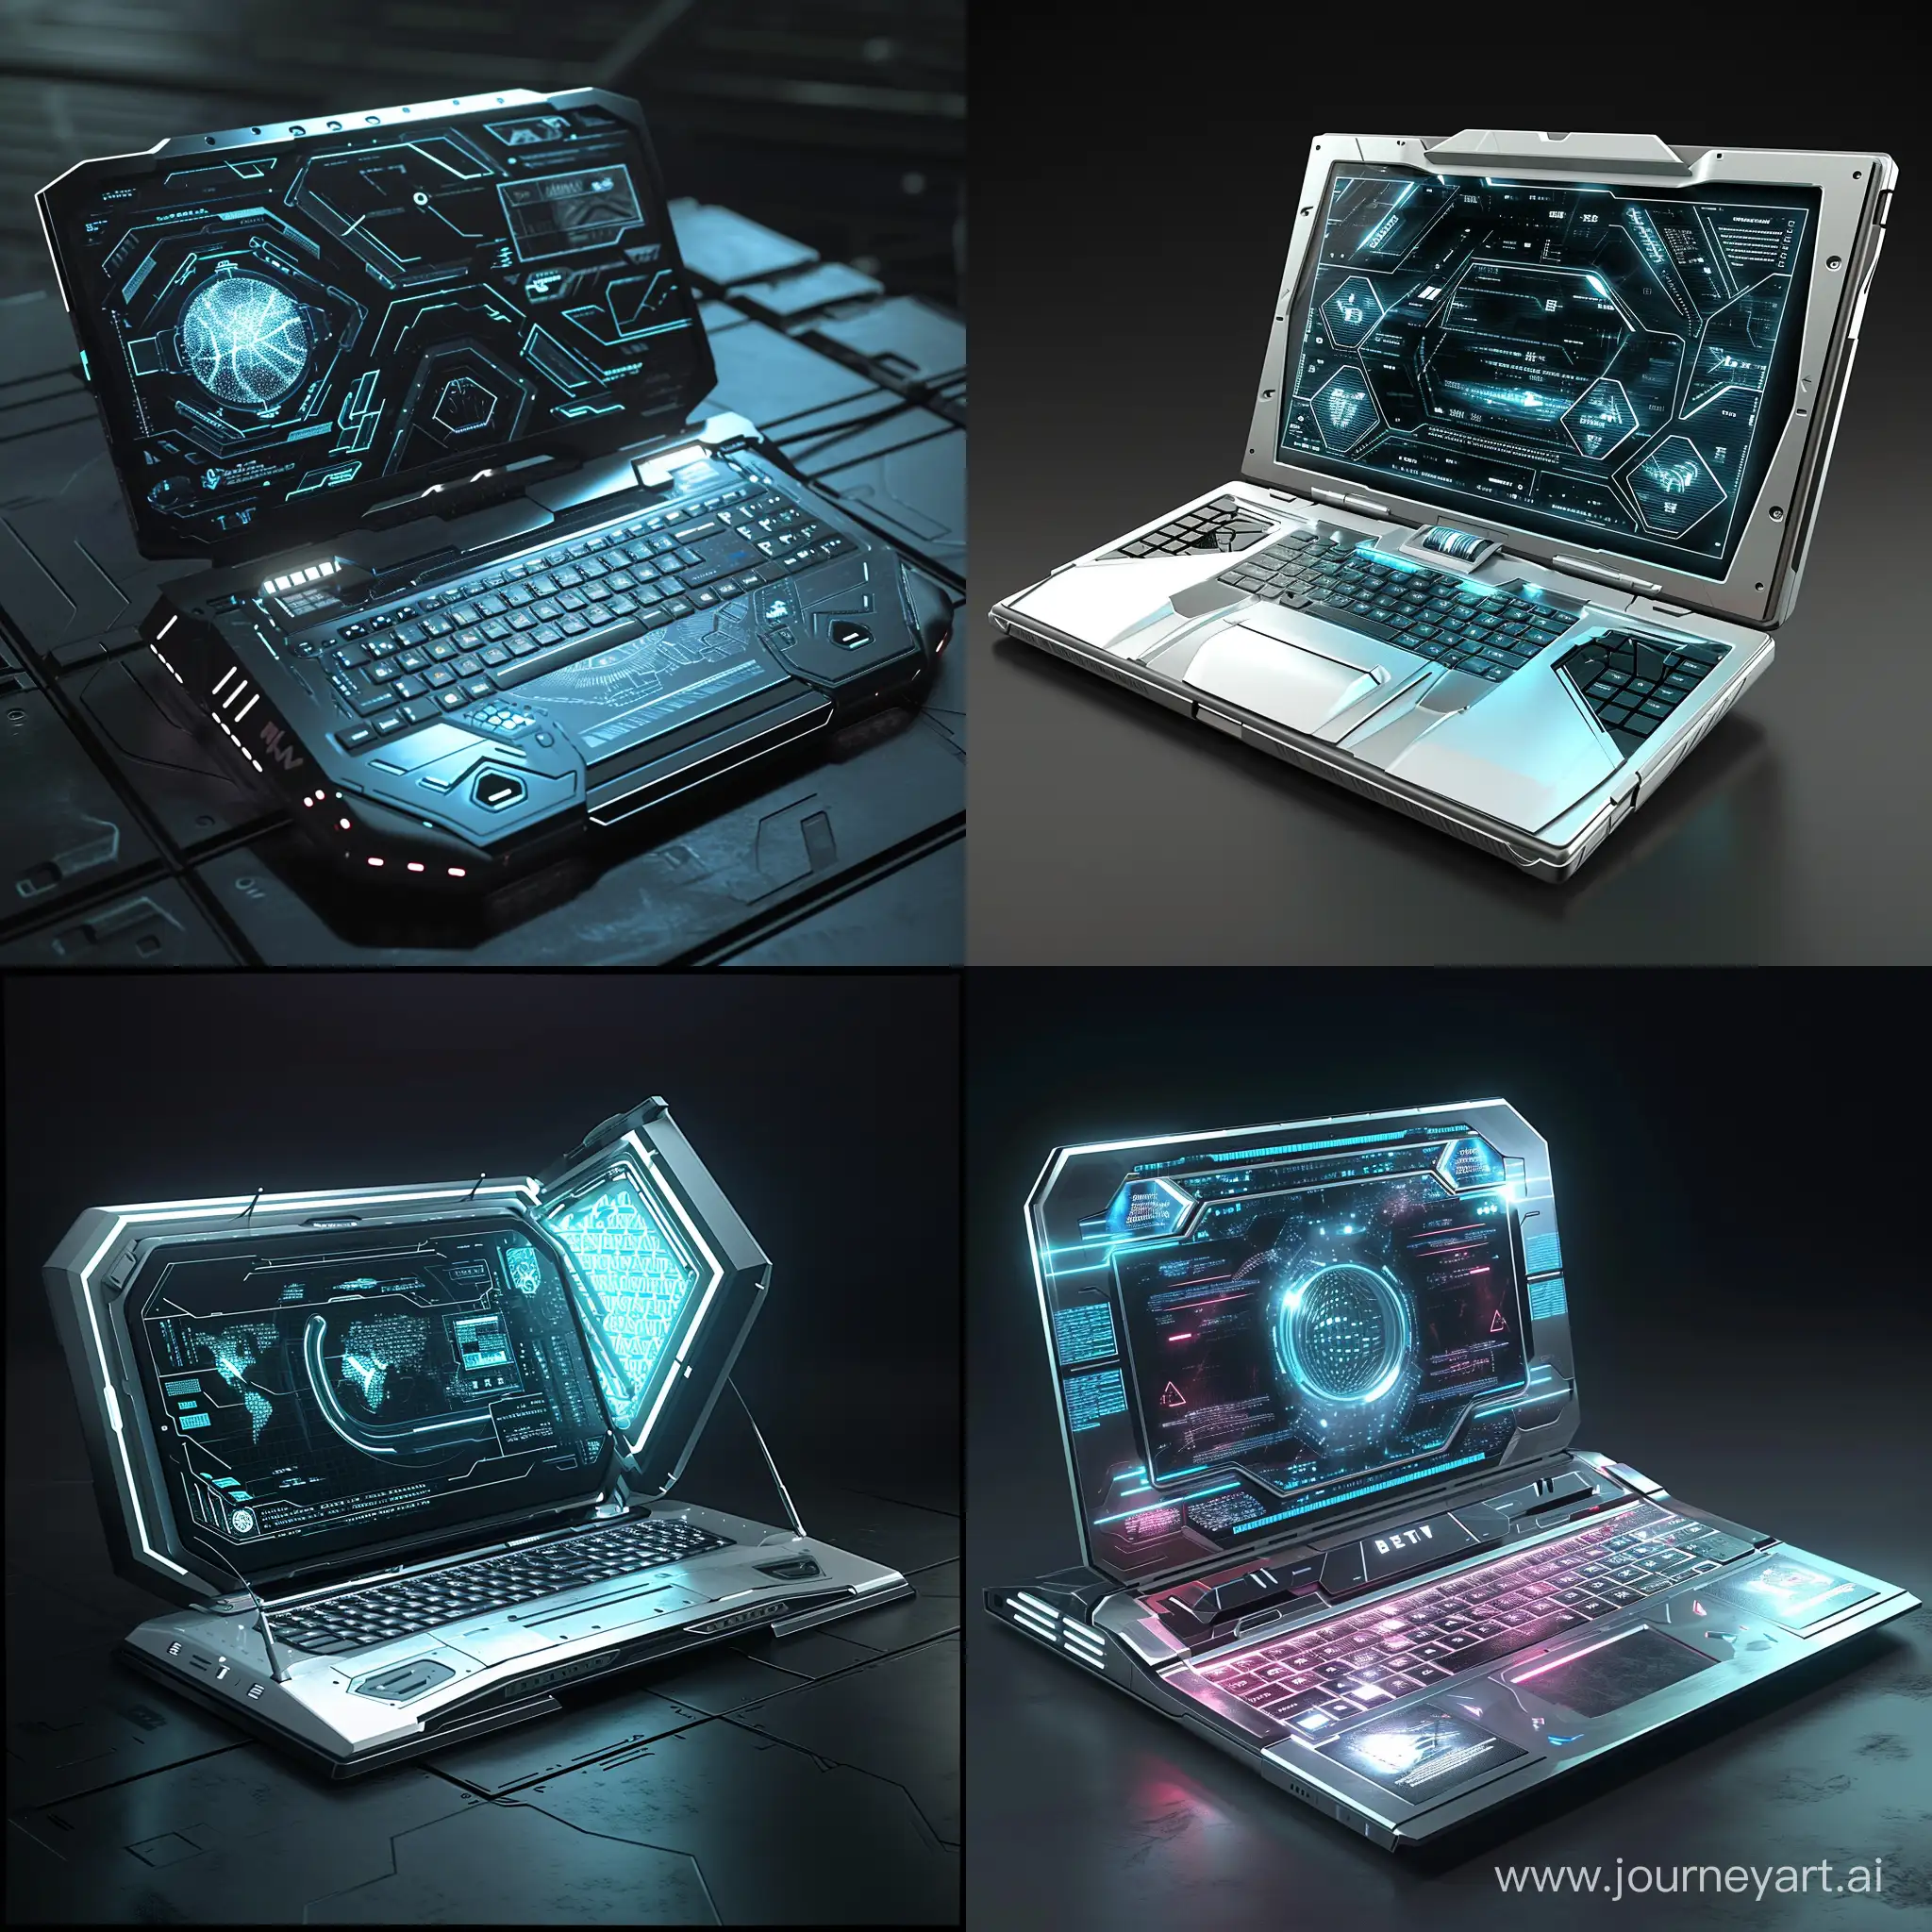 Futuristic-SciFi-Laptop-with-Smart-Materials-and-Biometric-Authentication